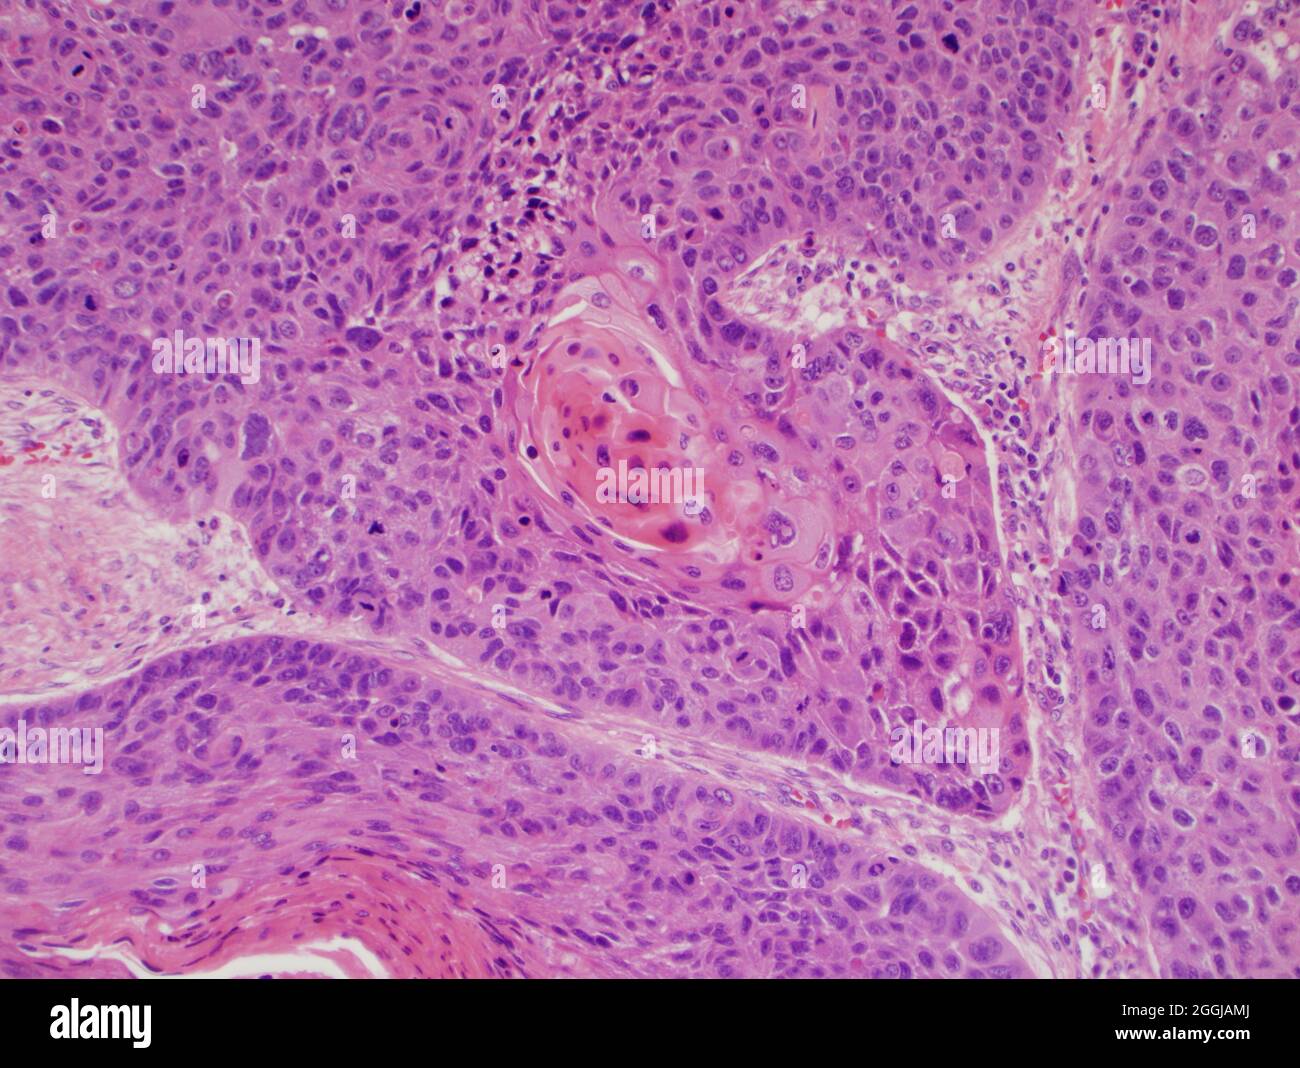 Lung cancer : pulmonary keratinizing squamous cell carcinoma associated with tobbaco use seen under microscope at 400x magnification. Stock Photo